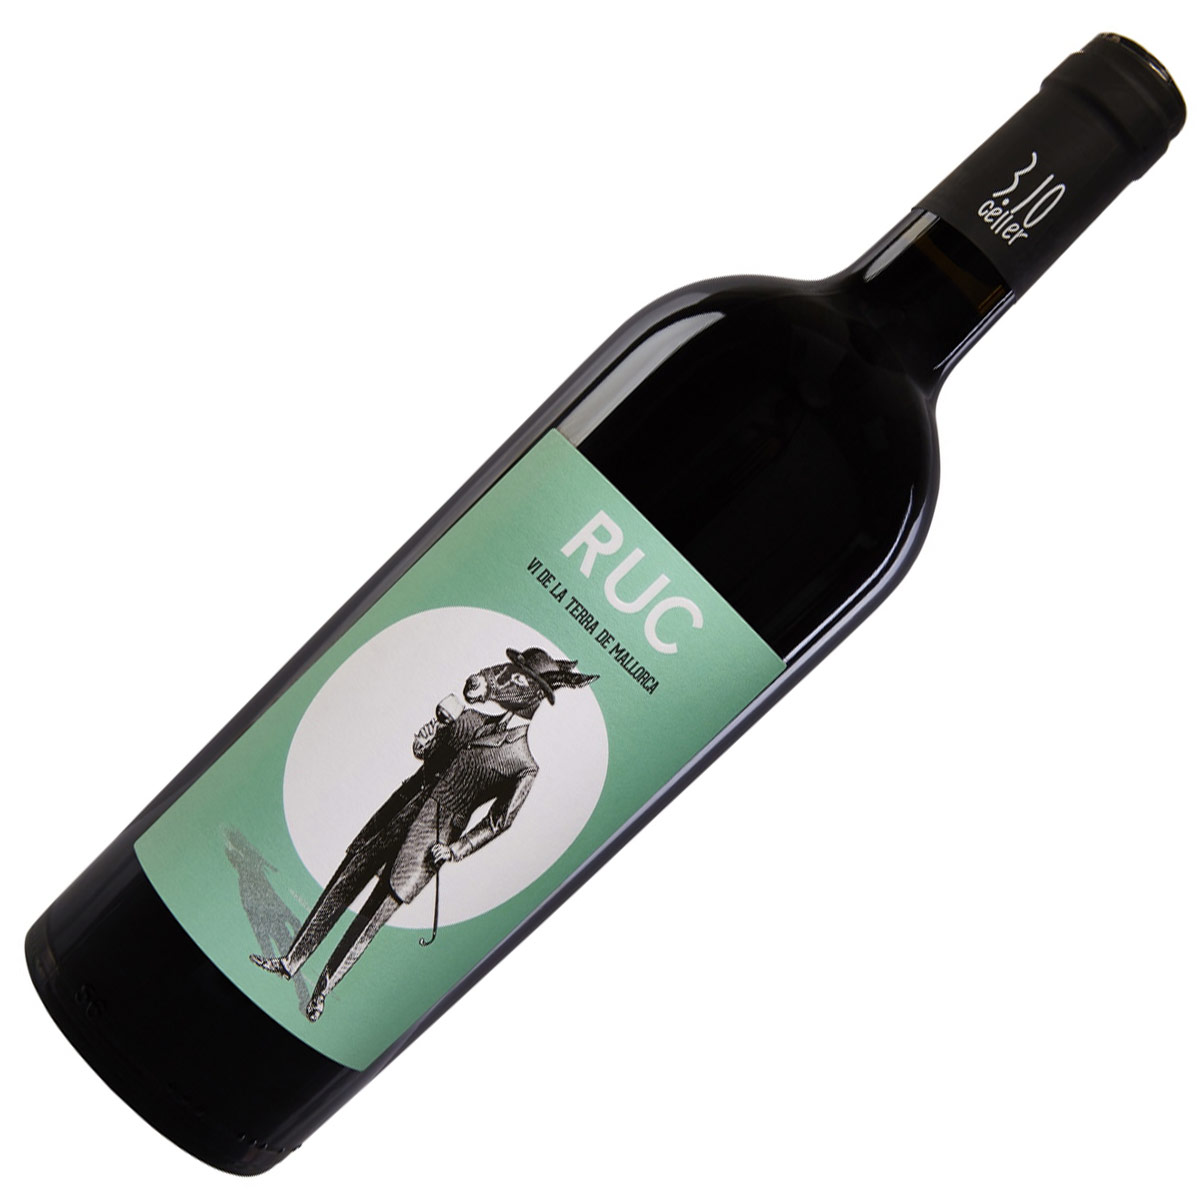 3.10 Celler Ruc organic Red wine